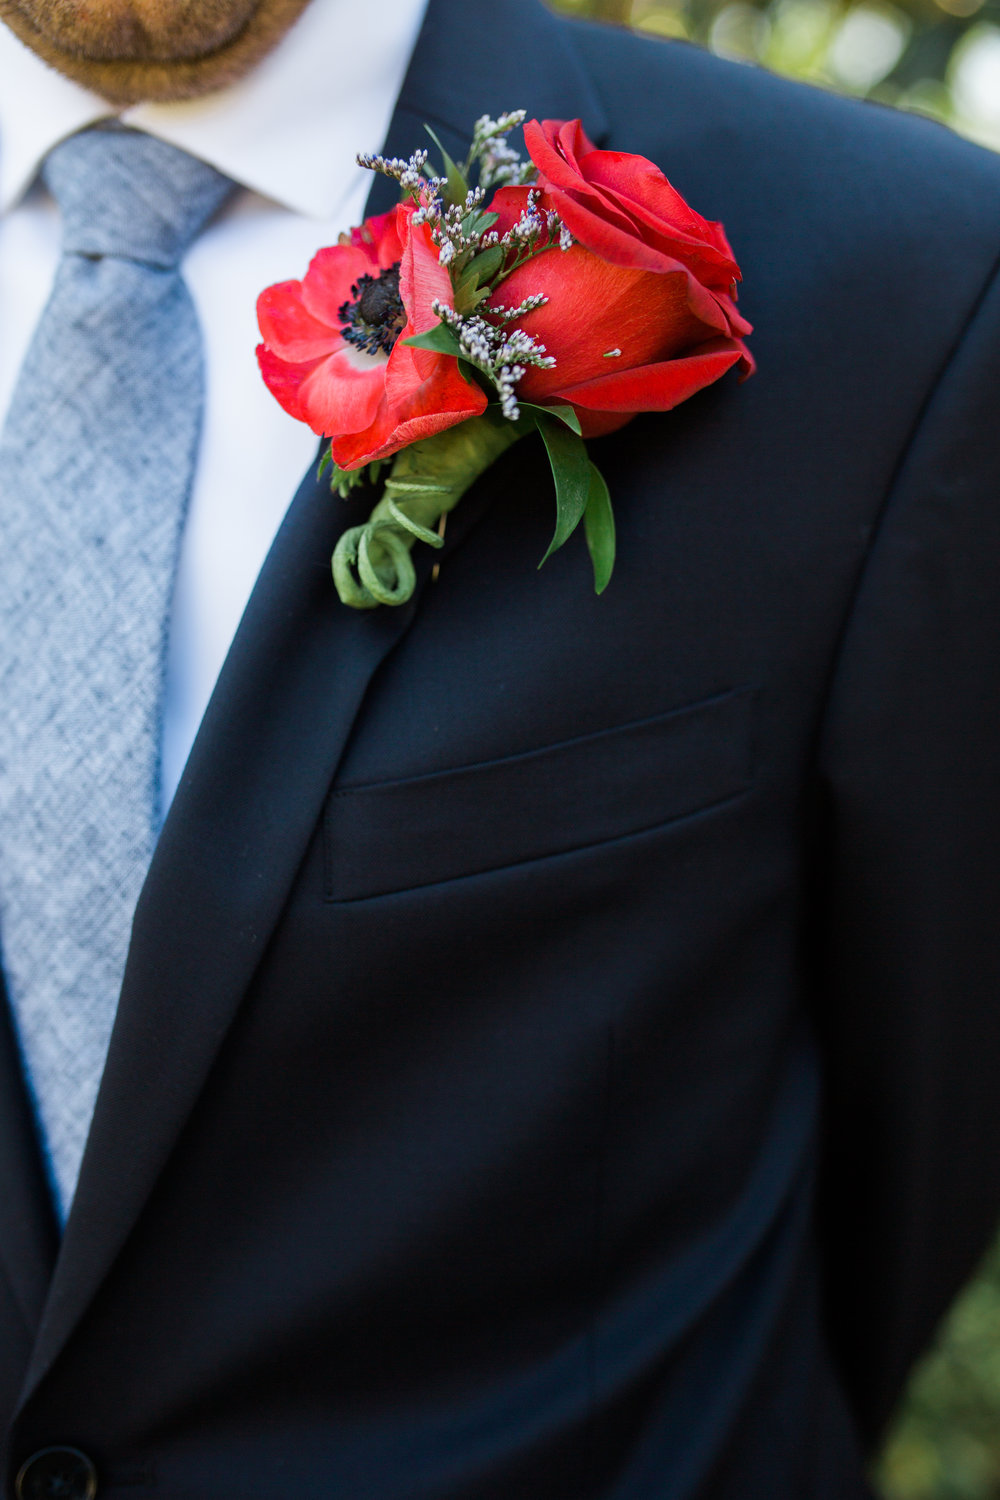 Flowers on the Lapel